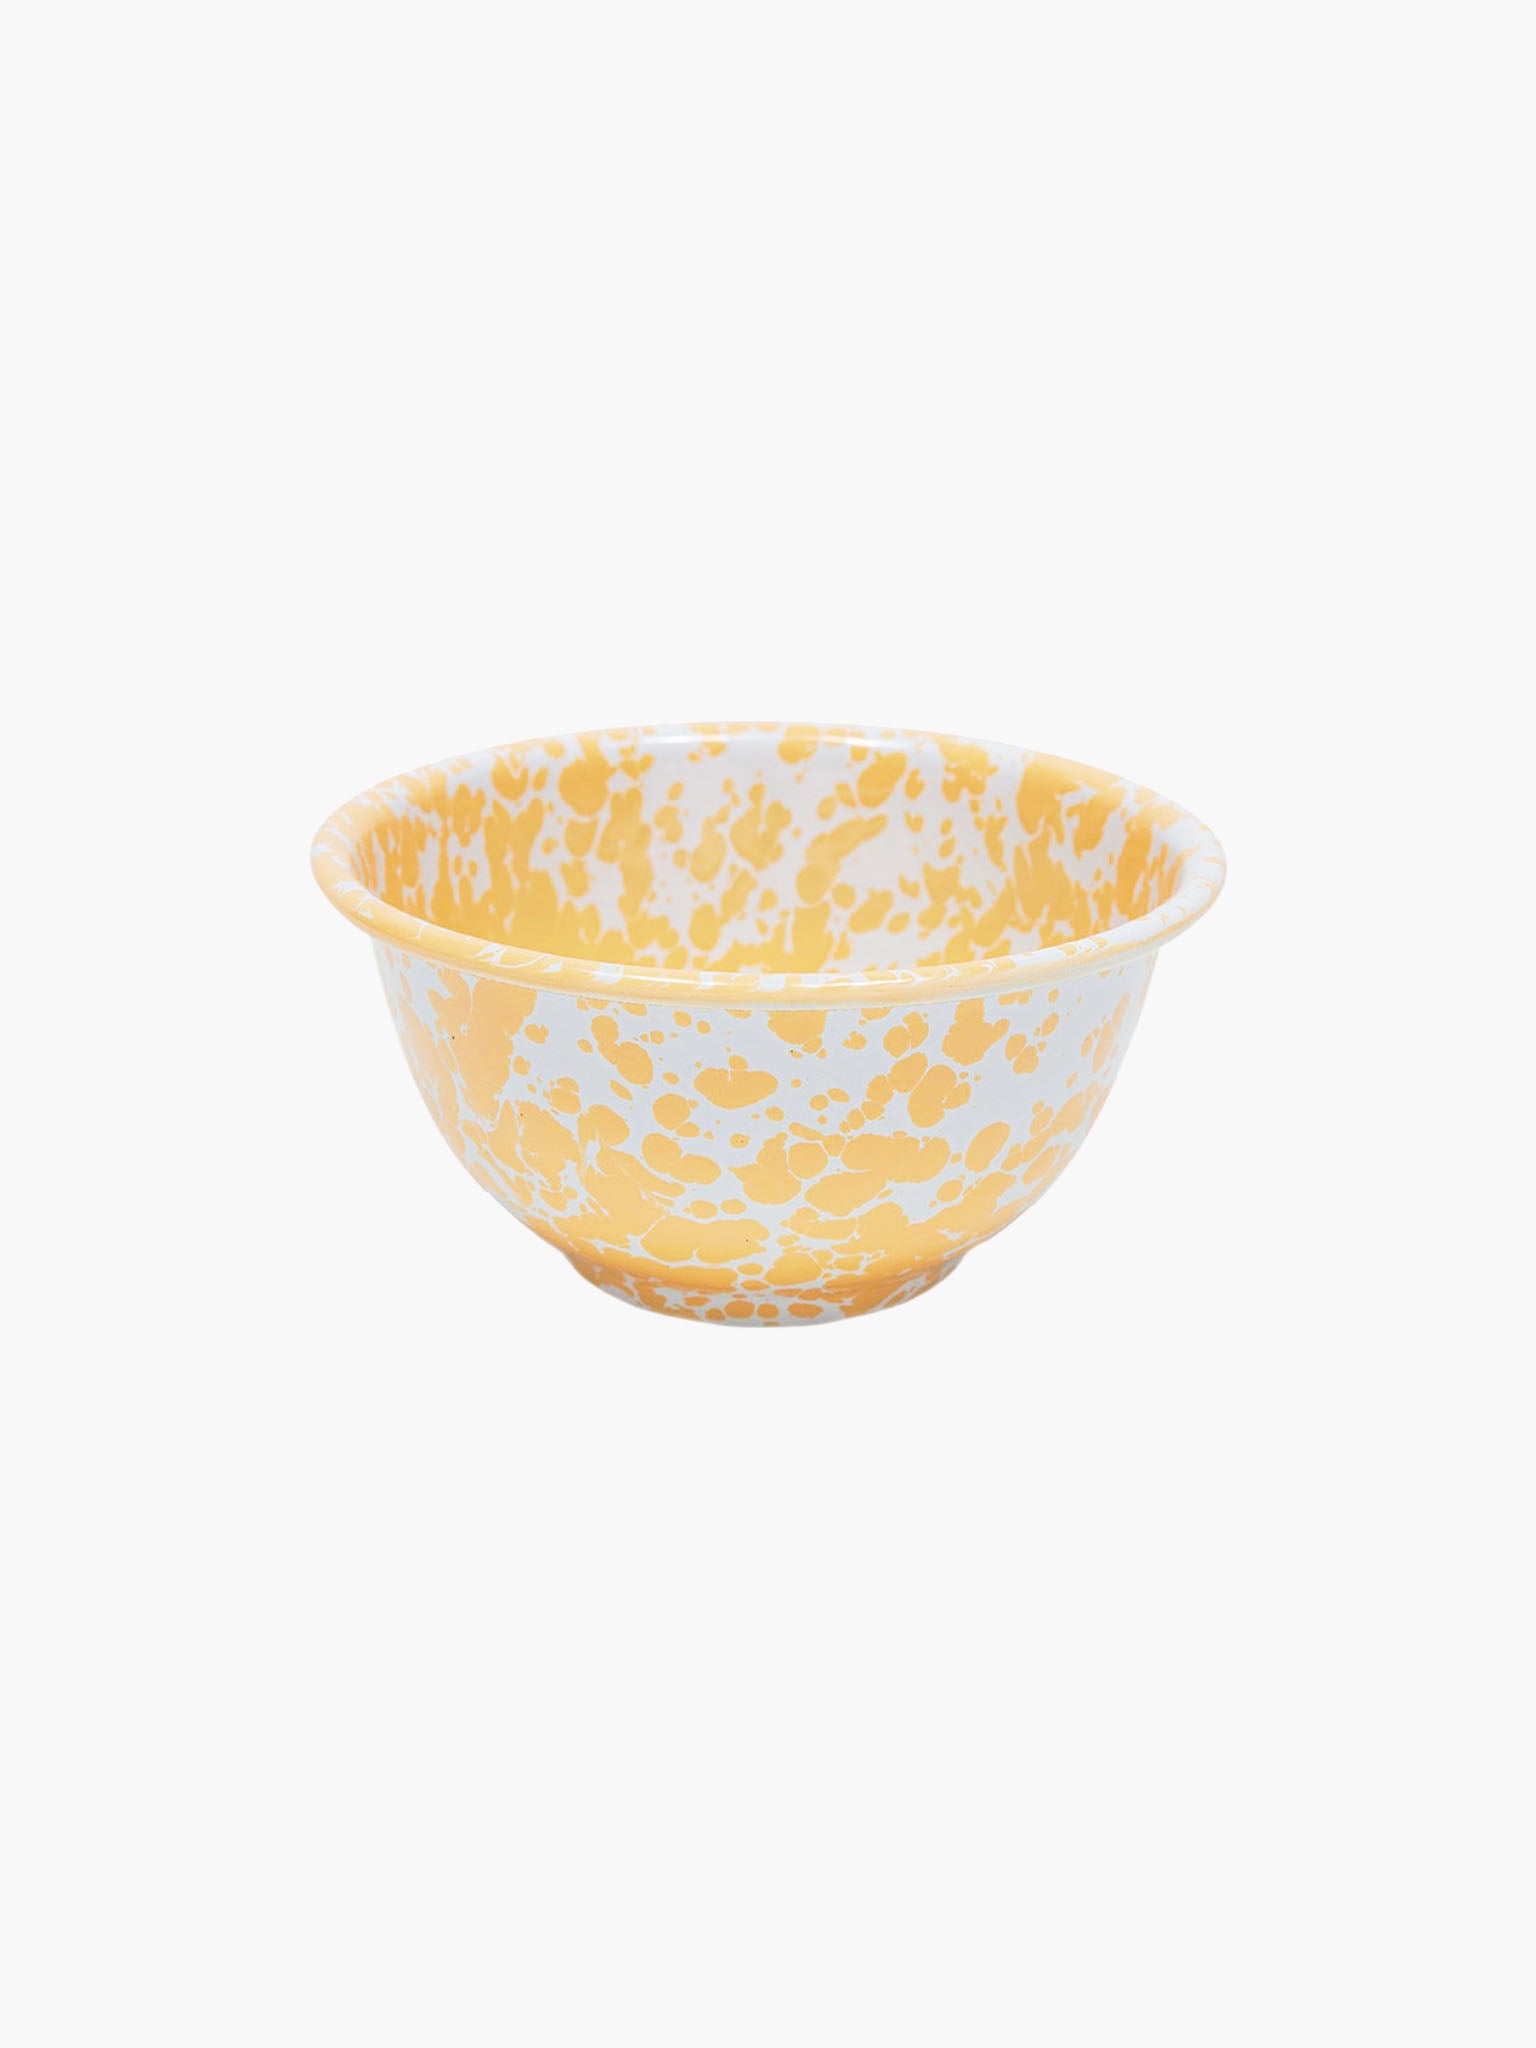 Splatter Small Footed Bowl (13cm) - Yellow